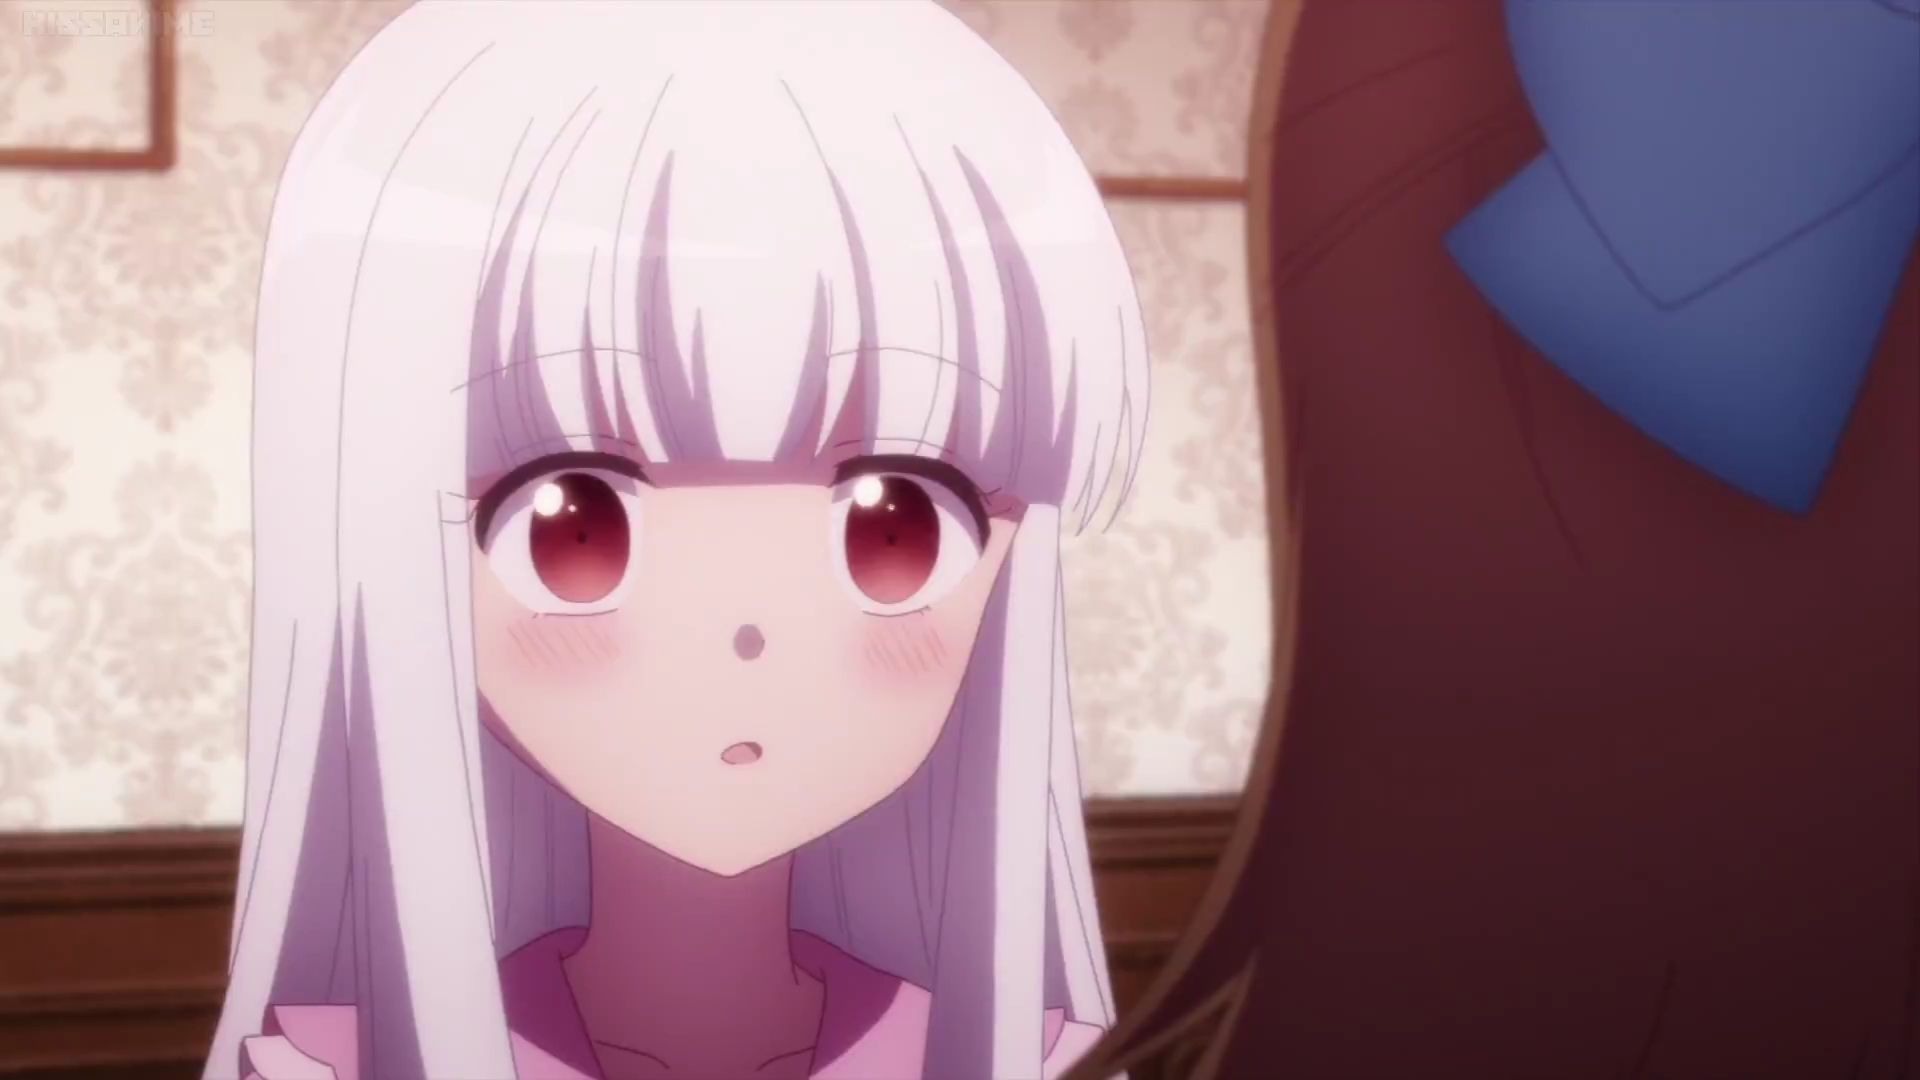 Sophia Ascart as seen in the anime series (Image via Silver Link)